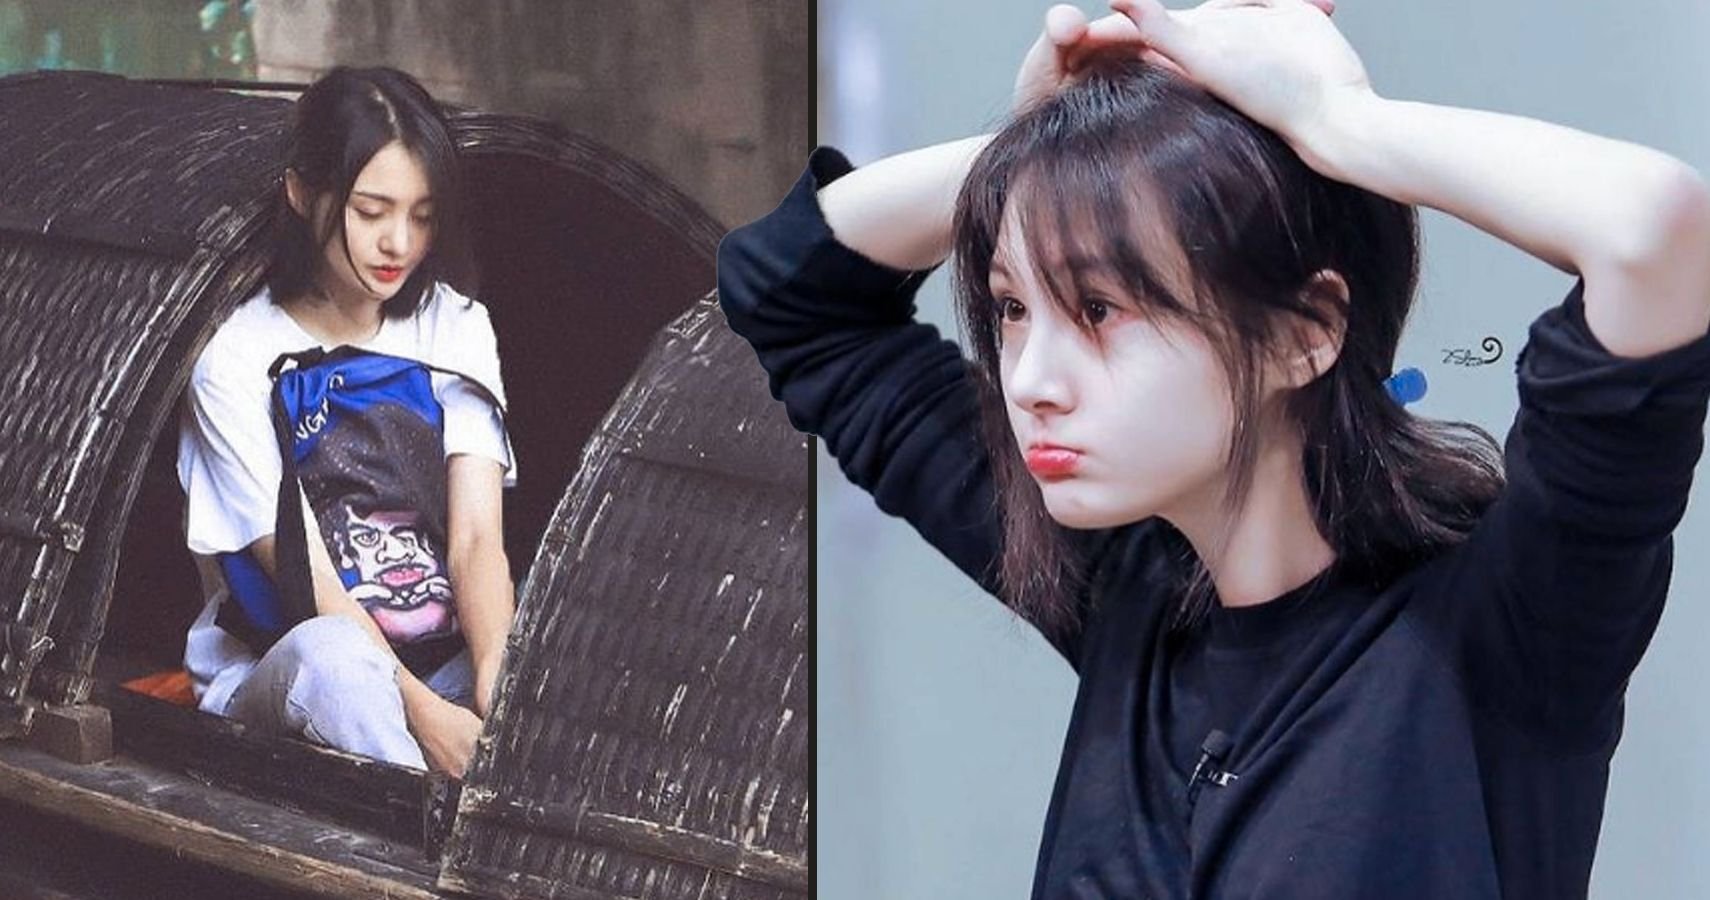 Actress Zheng Shuang Hit With a Tax Evasion Fine of $45 Million